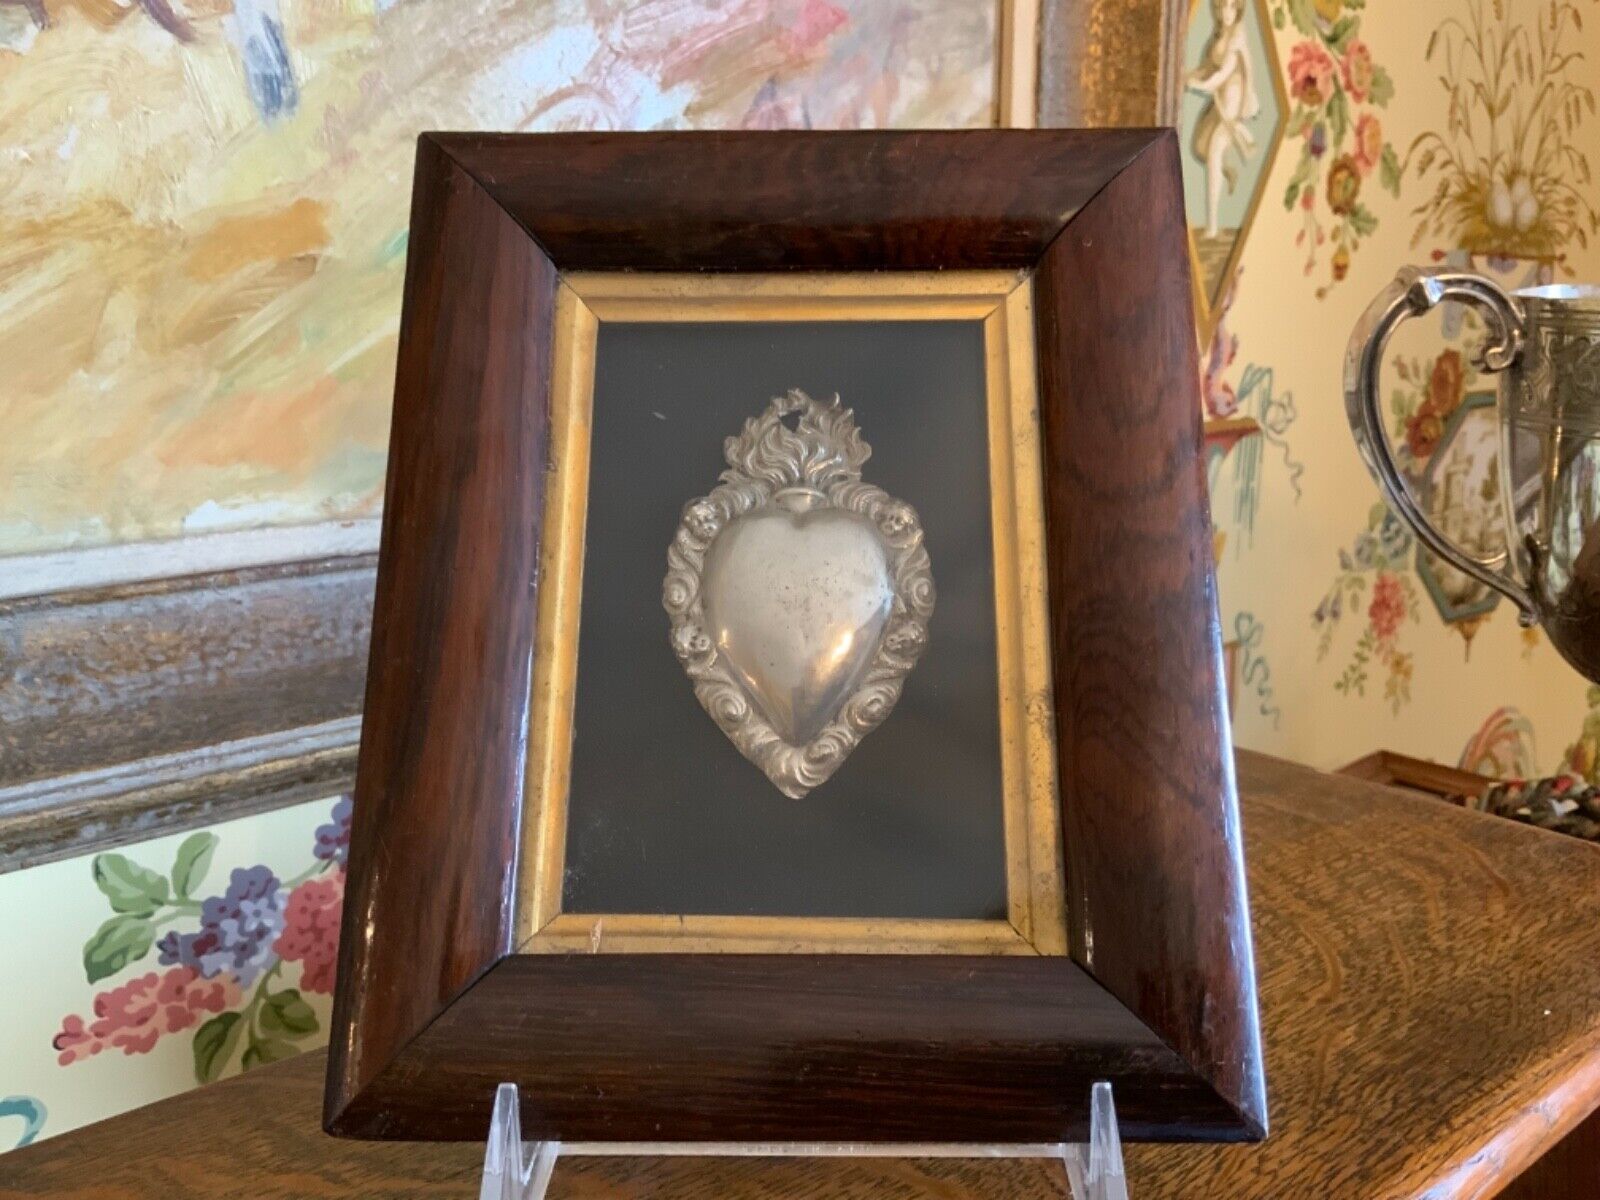 19th Century French Religious Framed Silver Flaming Sacred Heart Circa late 1800